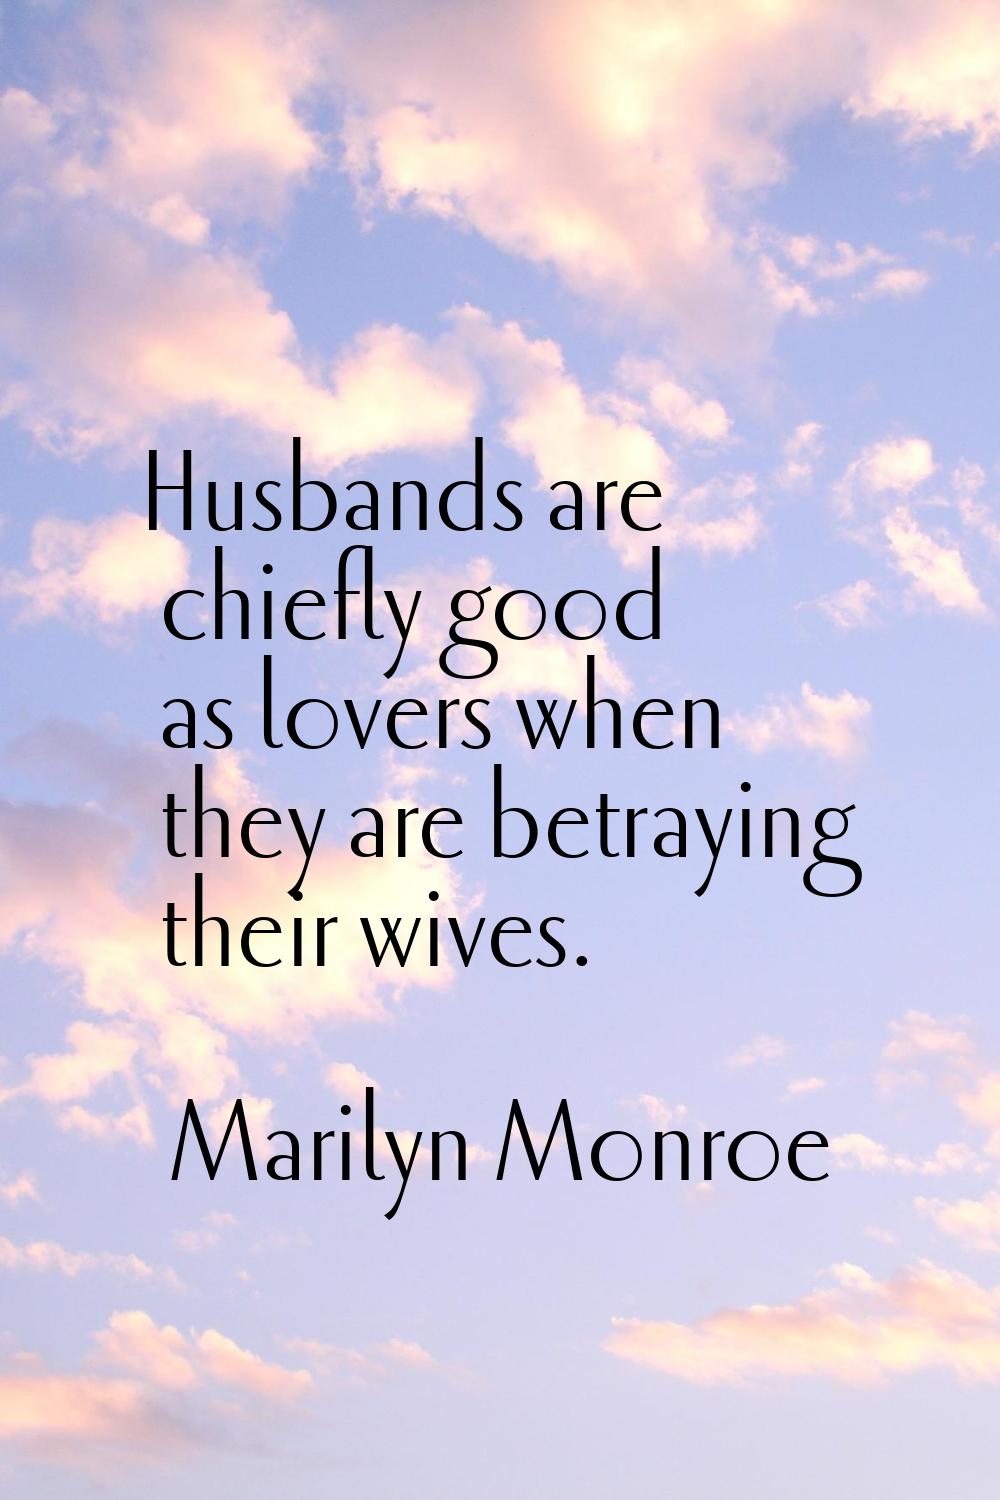 Husbands are chiefly good as lovers when they are betraying their wives.